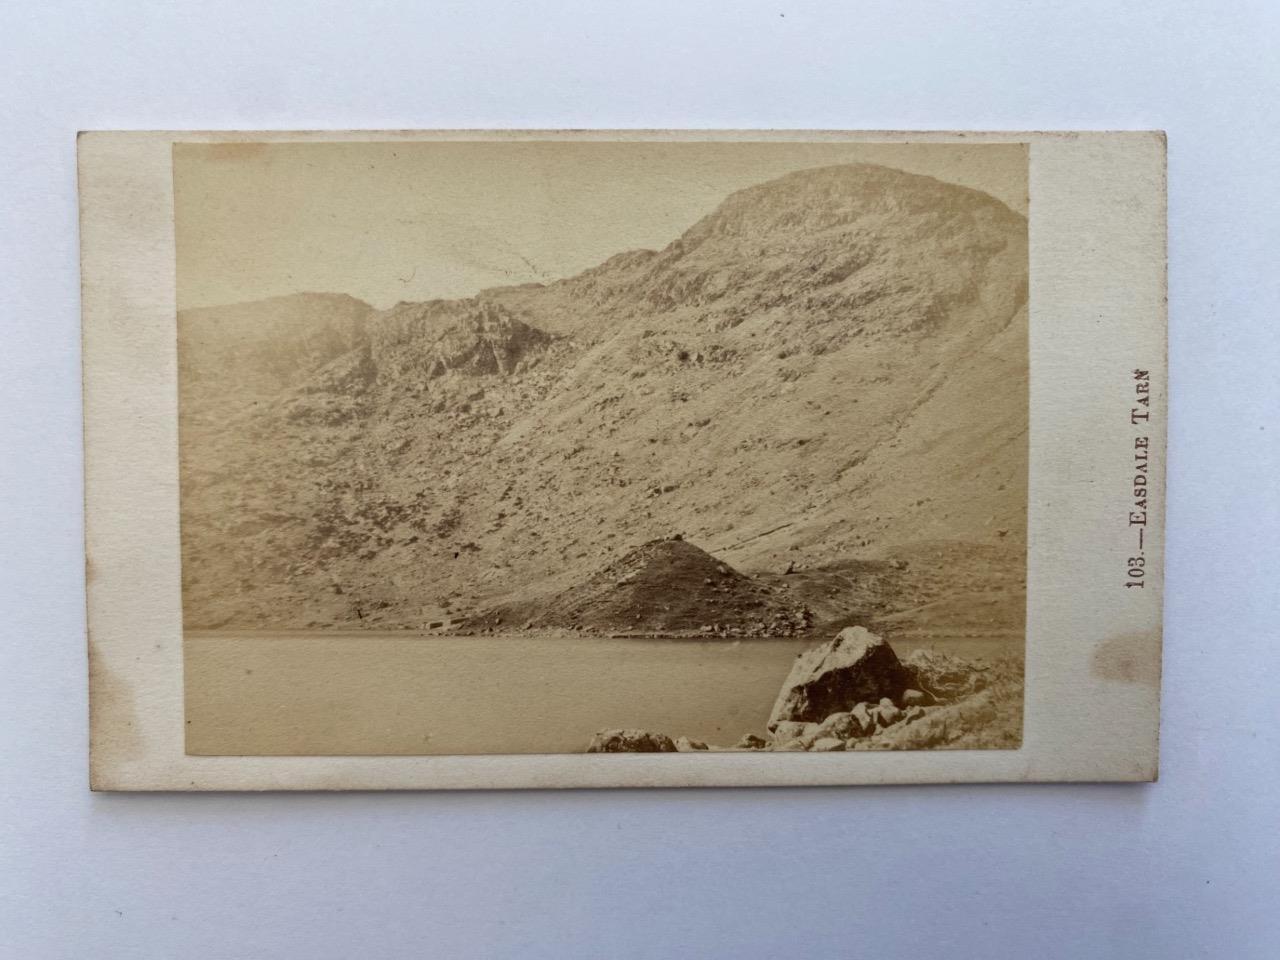 1870s CDV Photo Easdale Tarn by Carlyle Grasmere Cumbria